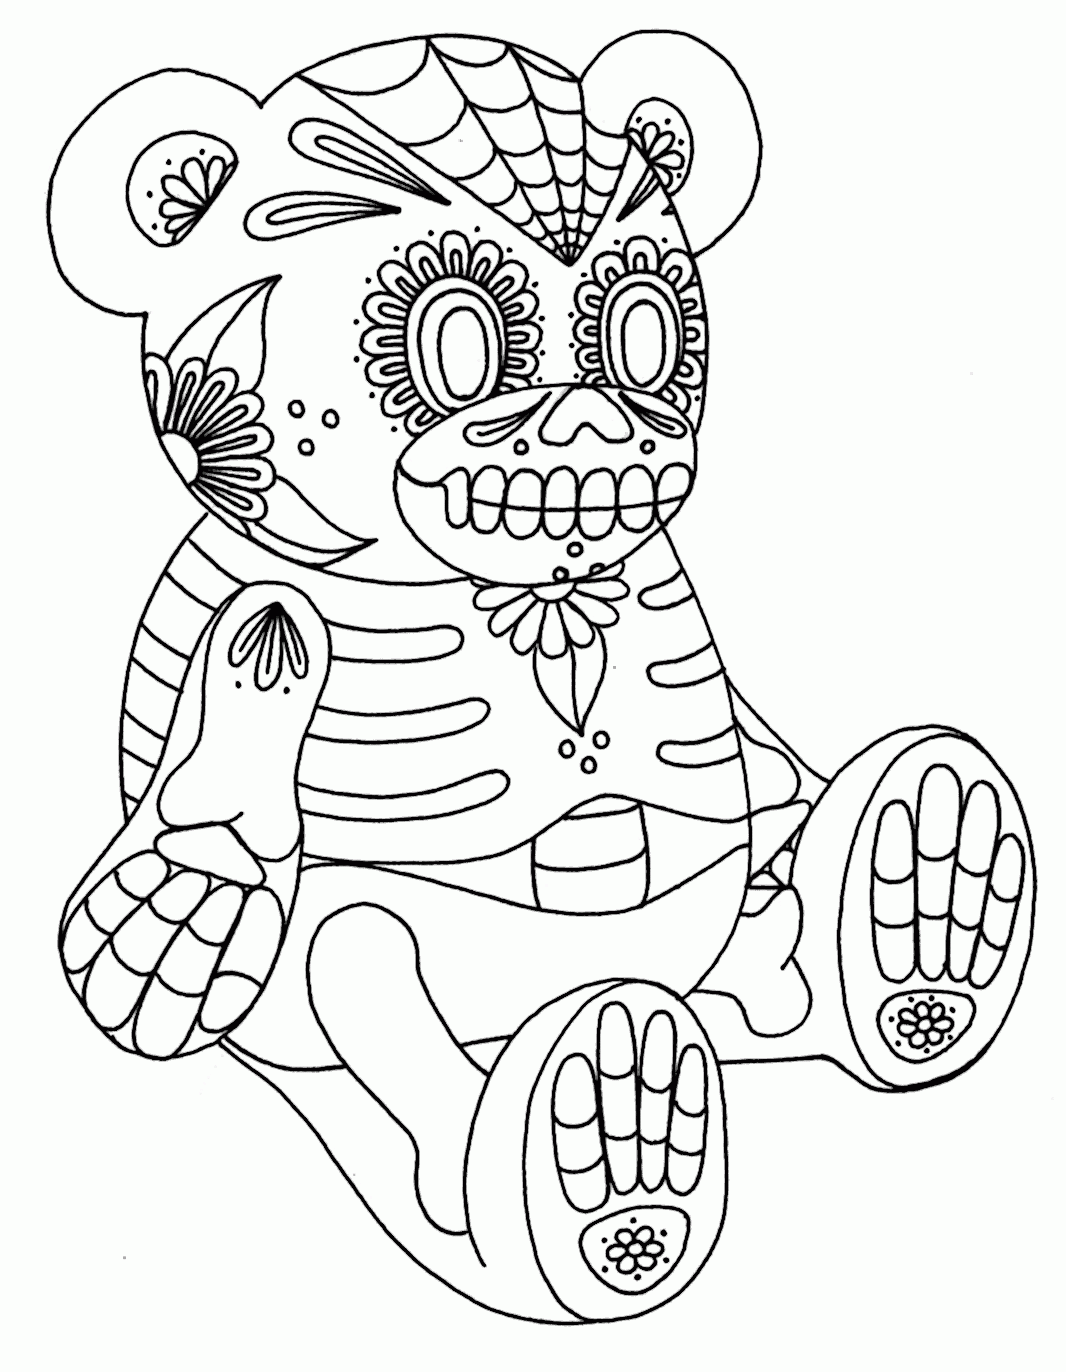 14 Pics of Sugar Skull Woman Coloring Pages - Day of the Dead Girl ...